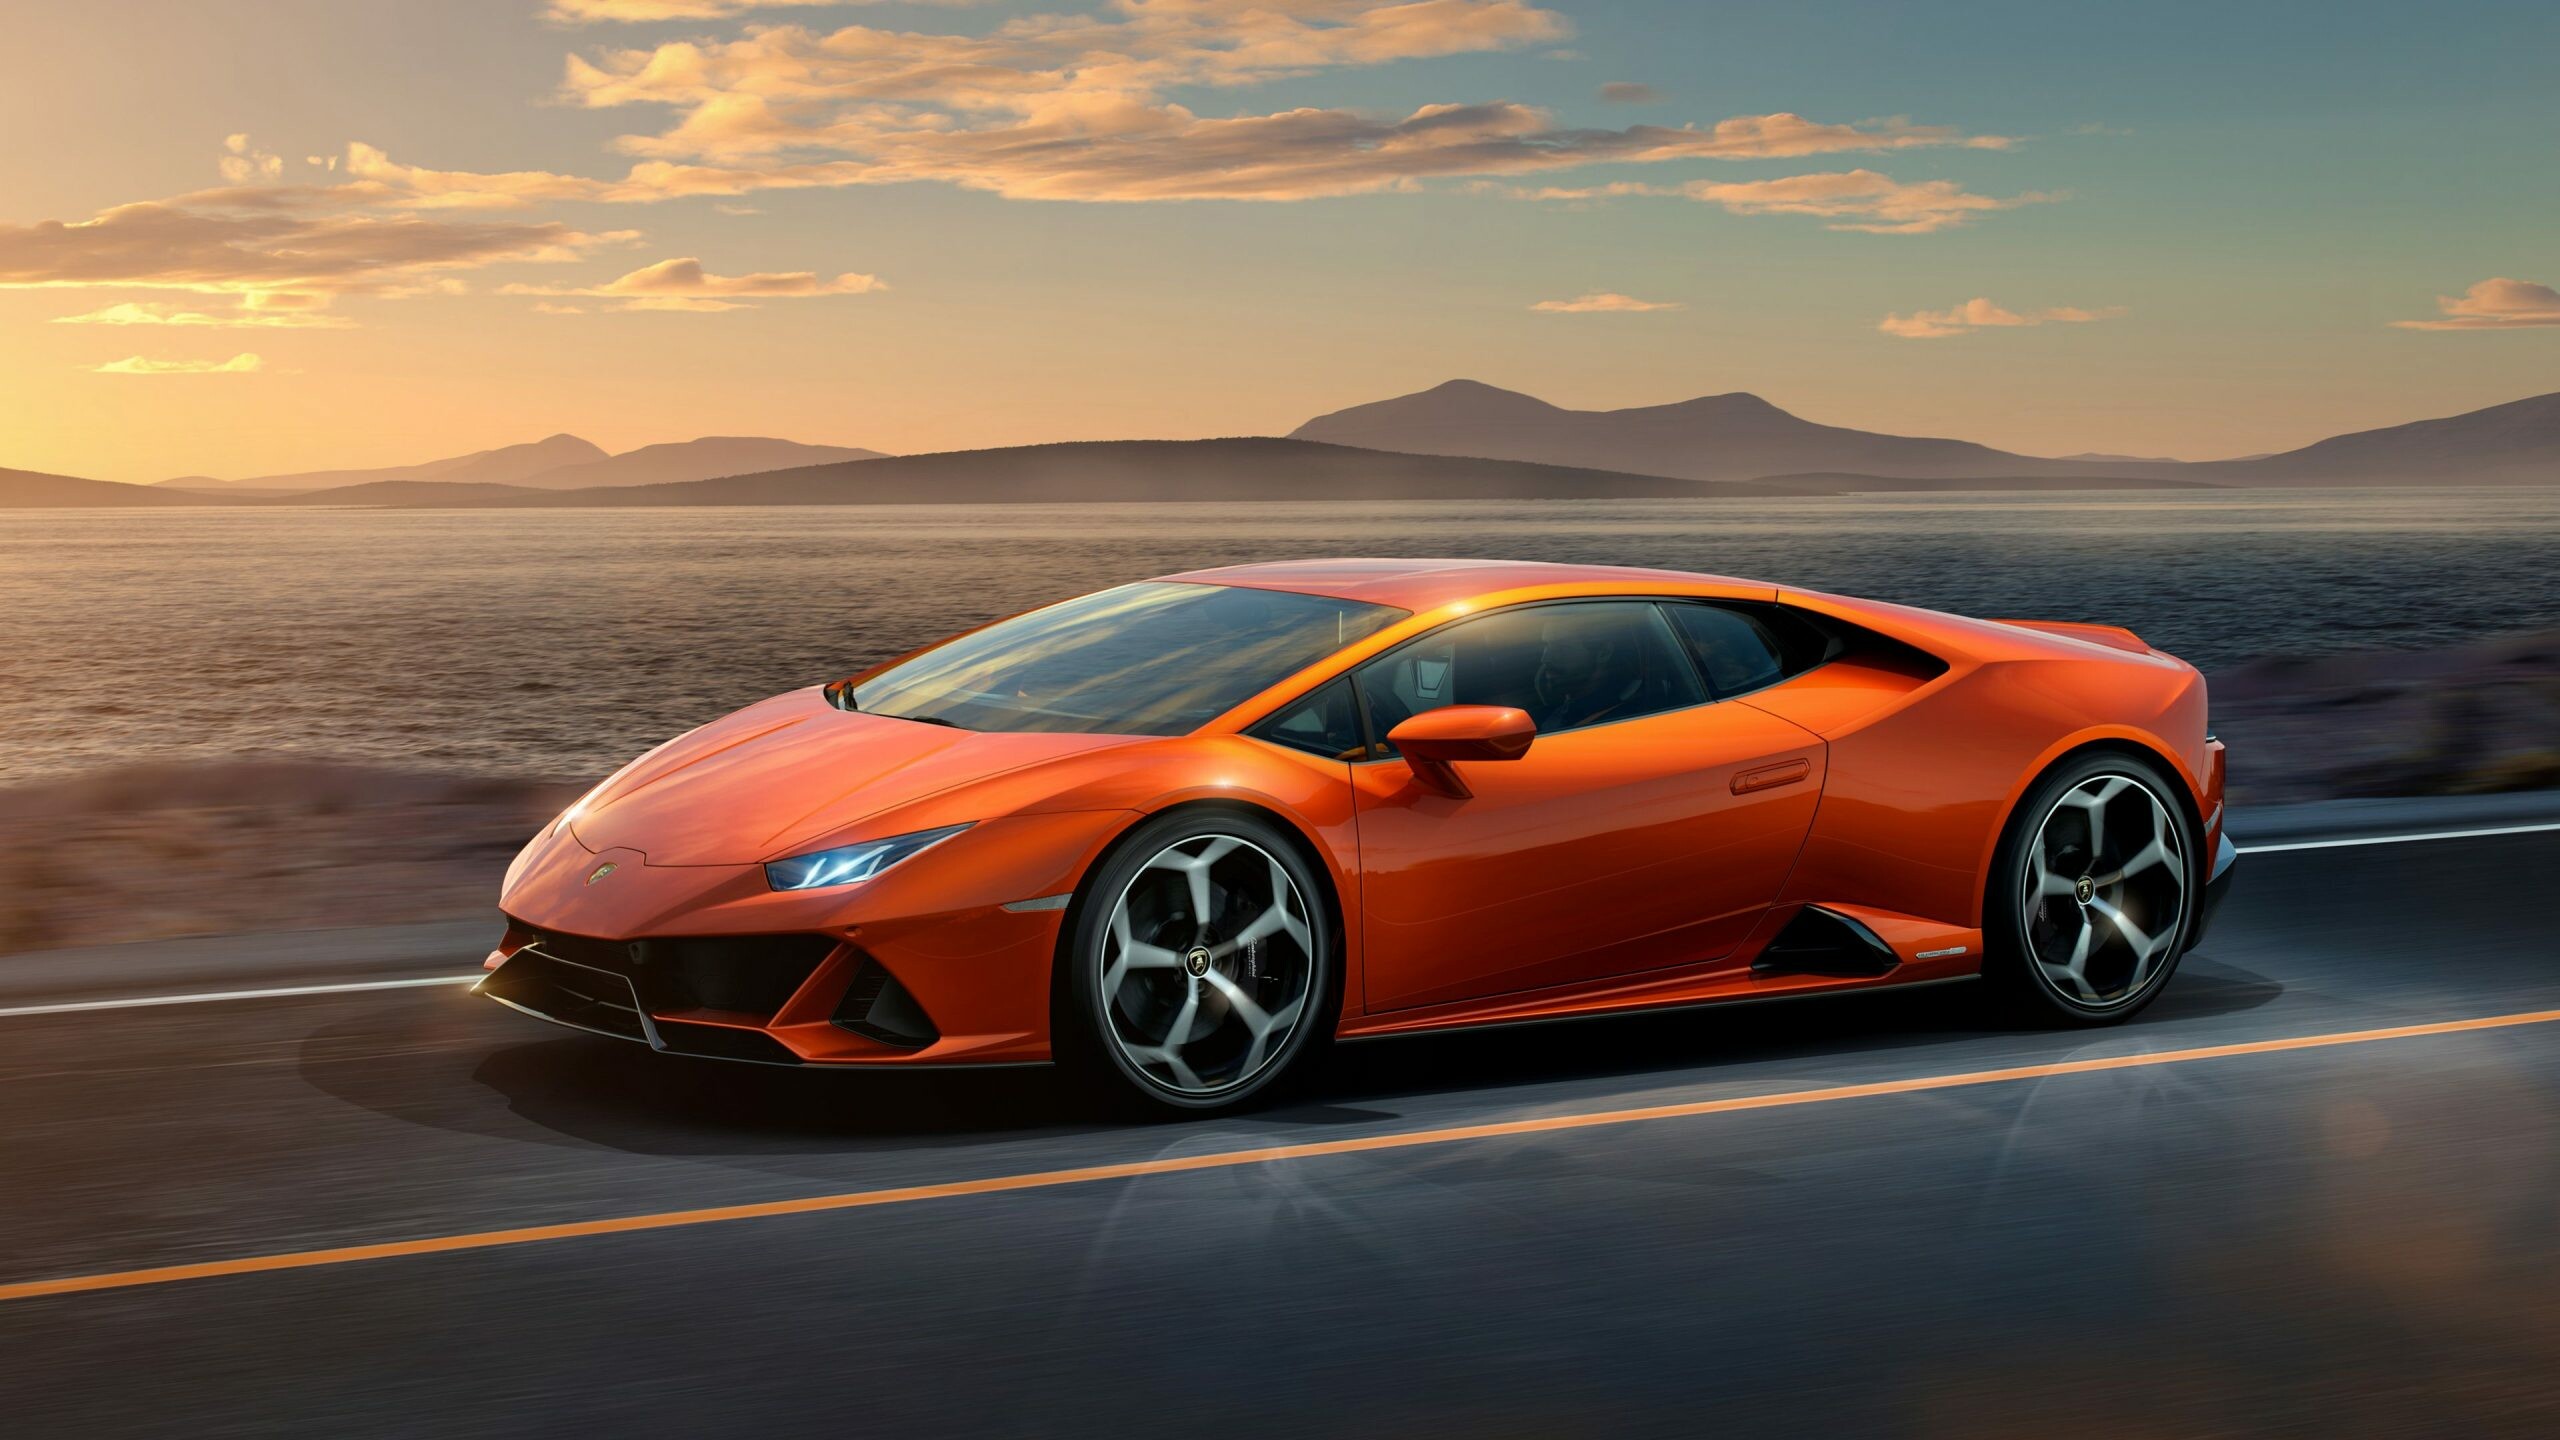 Lamborghini: Huracan, The Countach LP500 S was the first Countach variant to be officially sold in the U.S.. 2560x1440 HD Wallpaper.